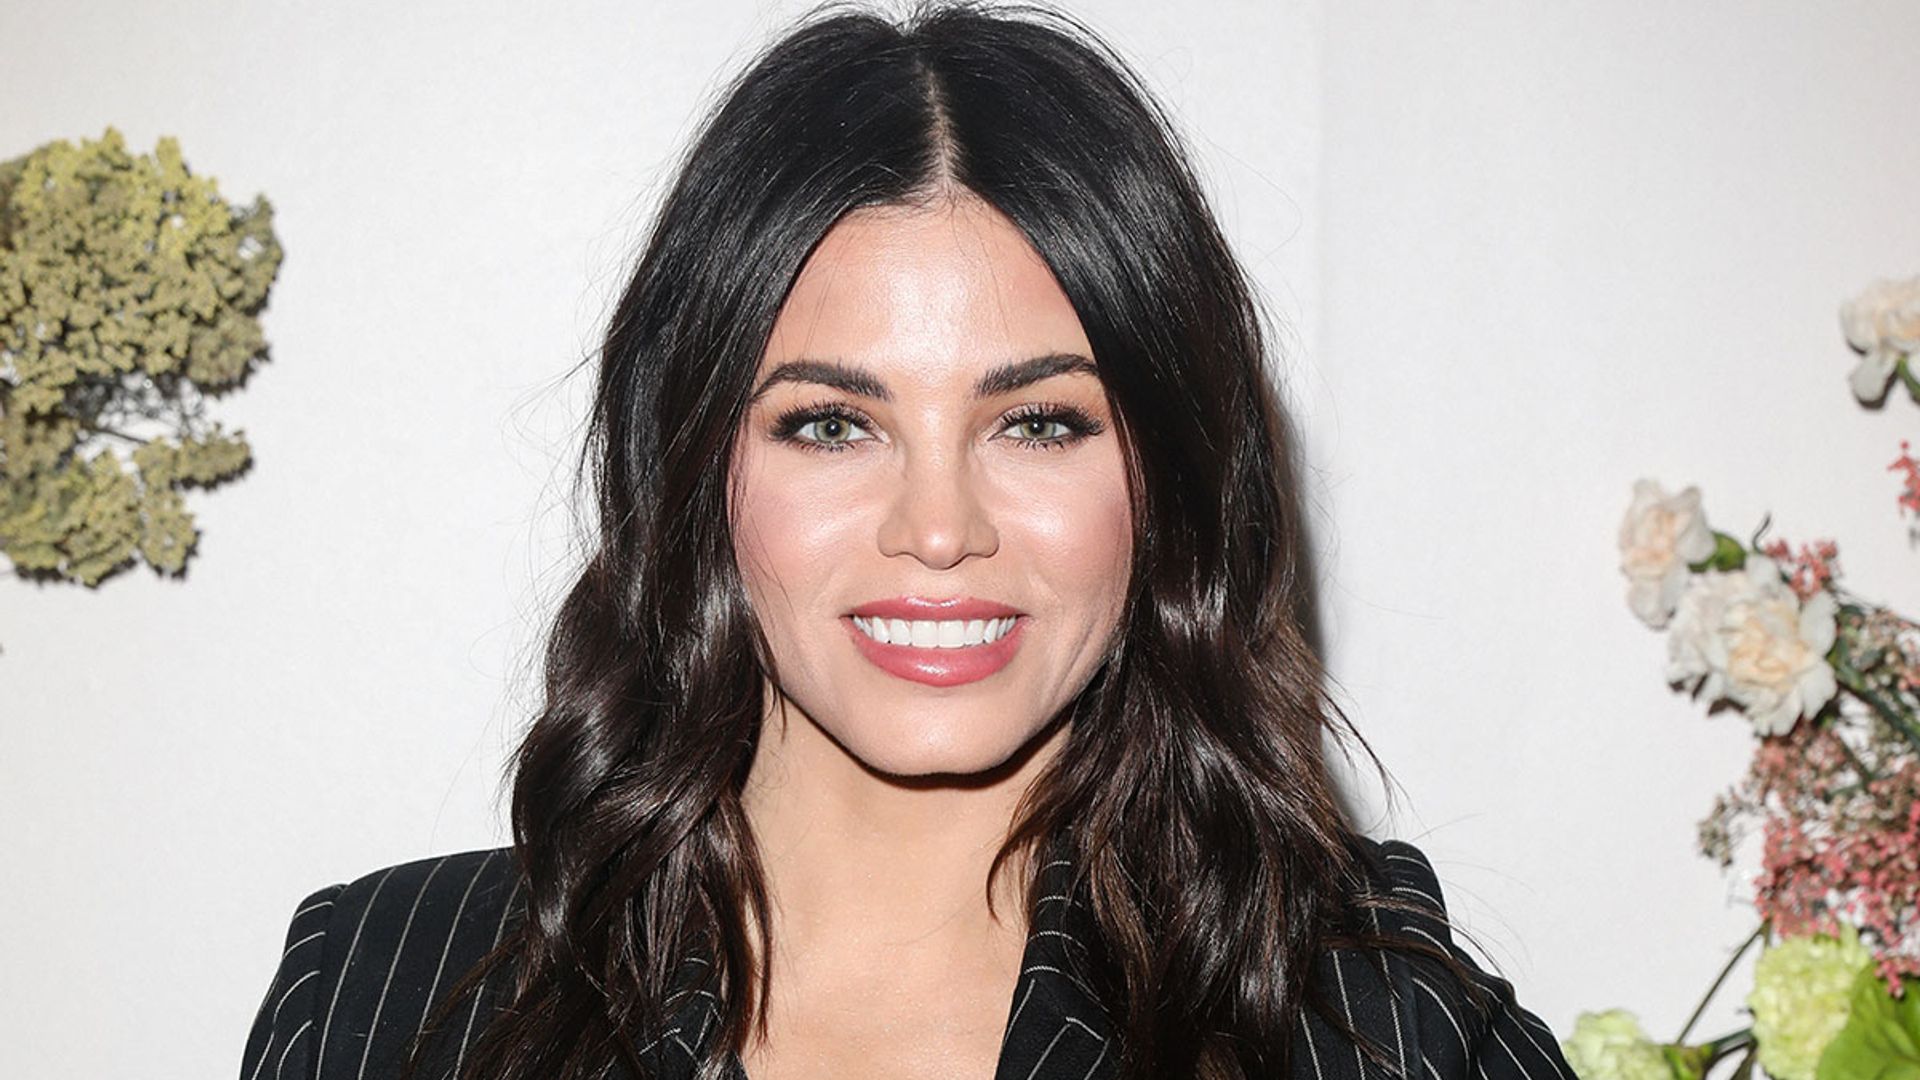 Jenna Dewan confirms she is pregnant one year after Channing Tatum split